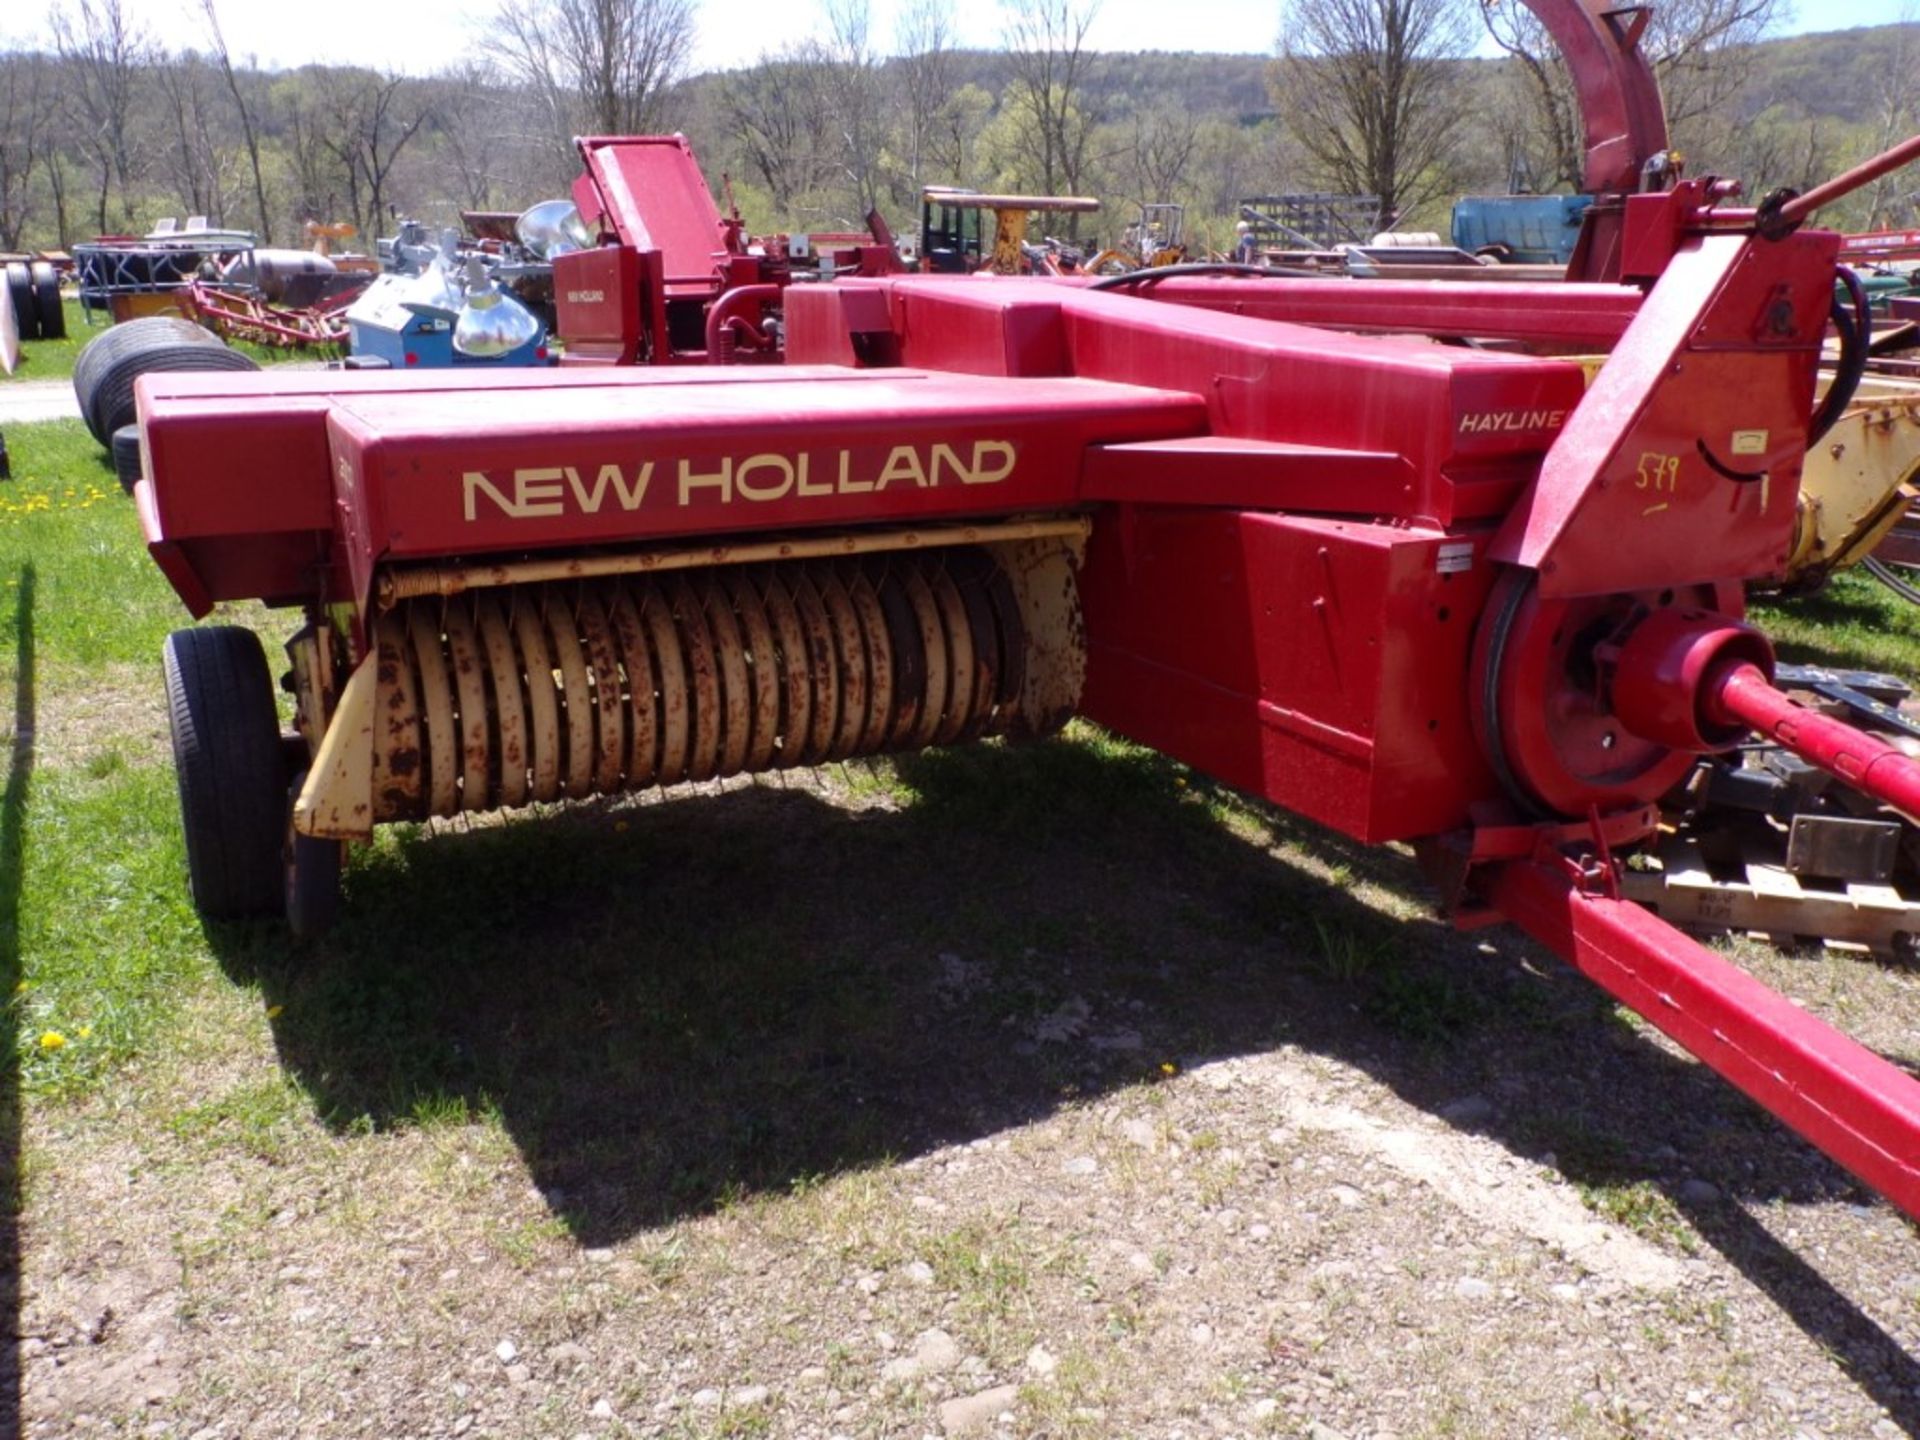 New Holland 310 ''Hay Liner'' Square Baler with Kicker, Ser. # 539943 (5046) - Image 2 of 4